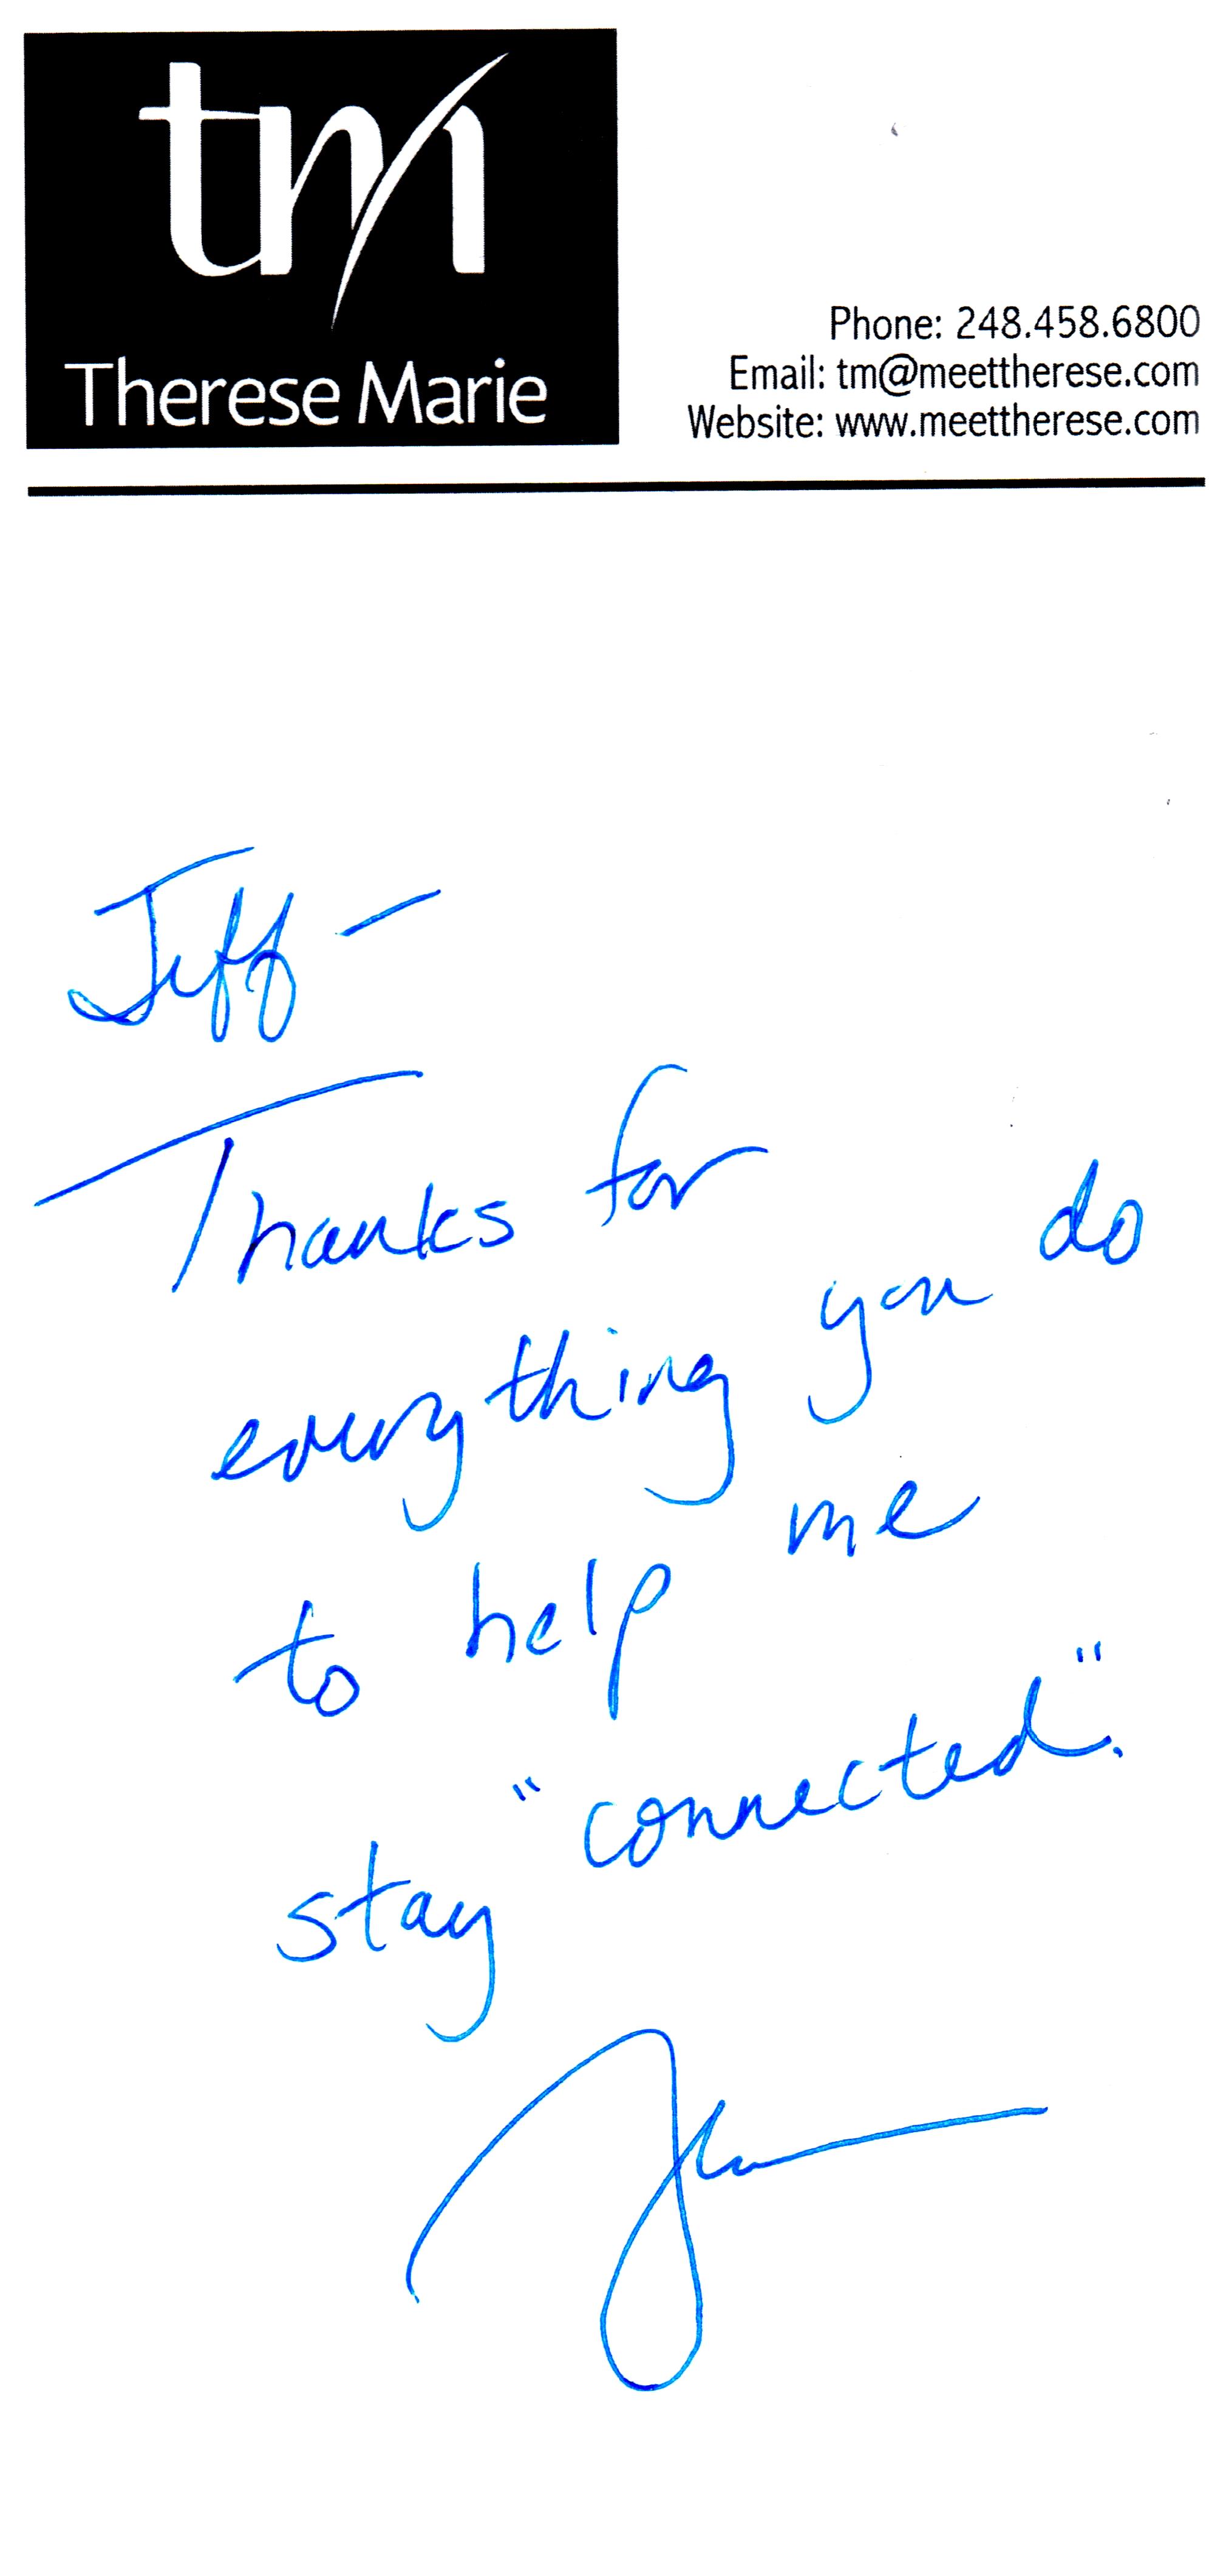 Jeff, Thanks for everything you do to help me stay "connected" 